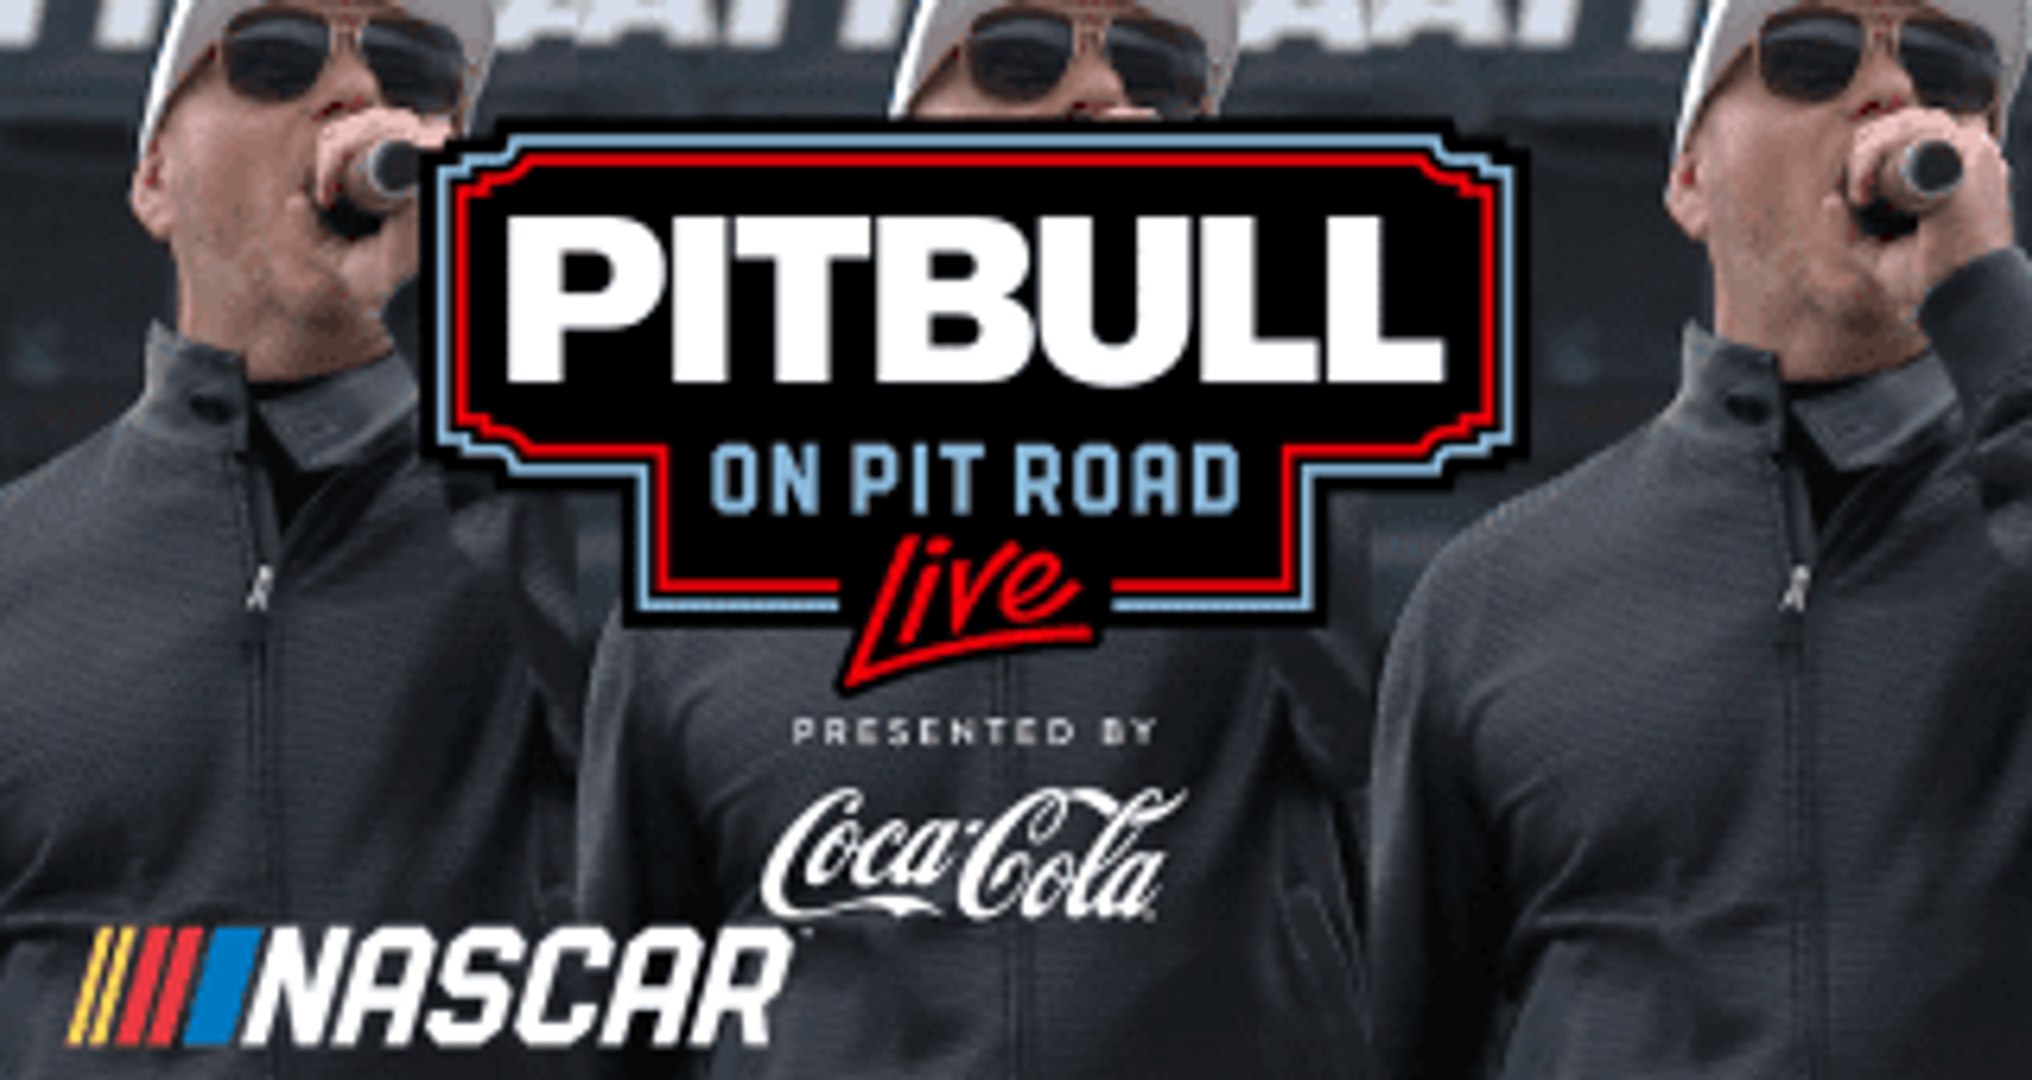 Pitbull on Pit Road Live presented by Coca-Cola